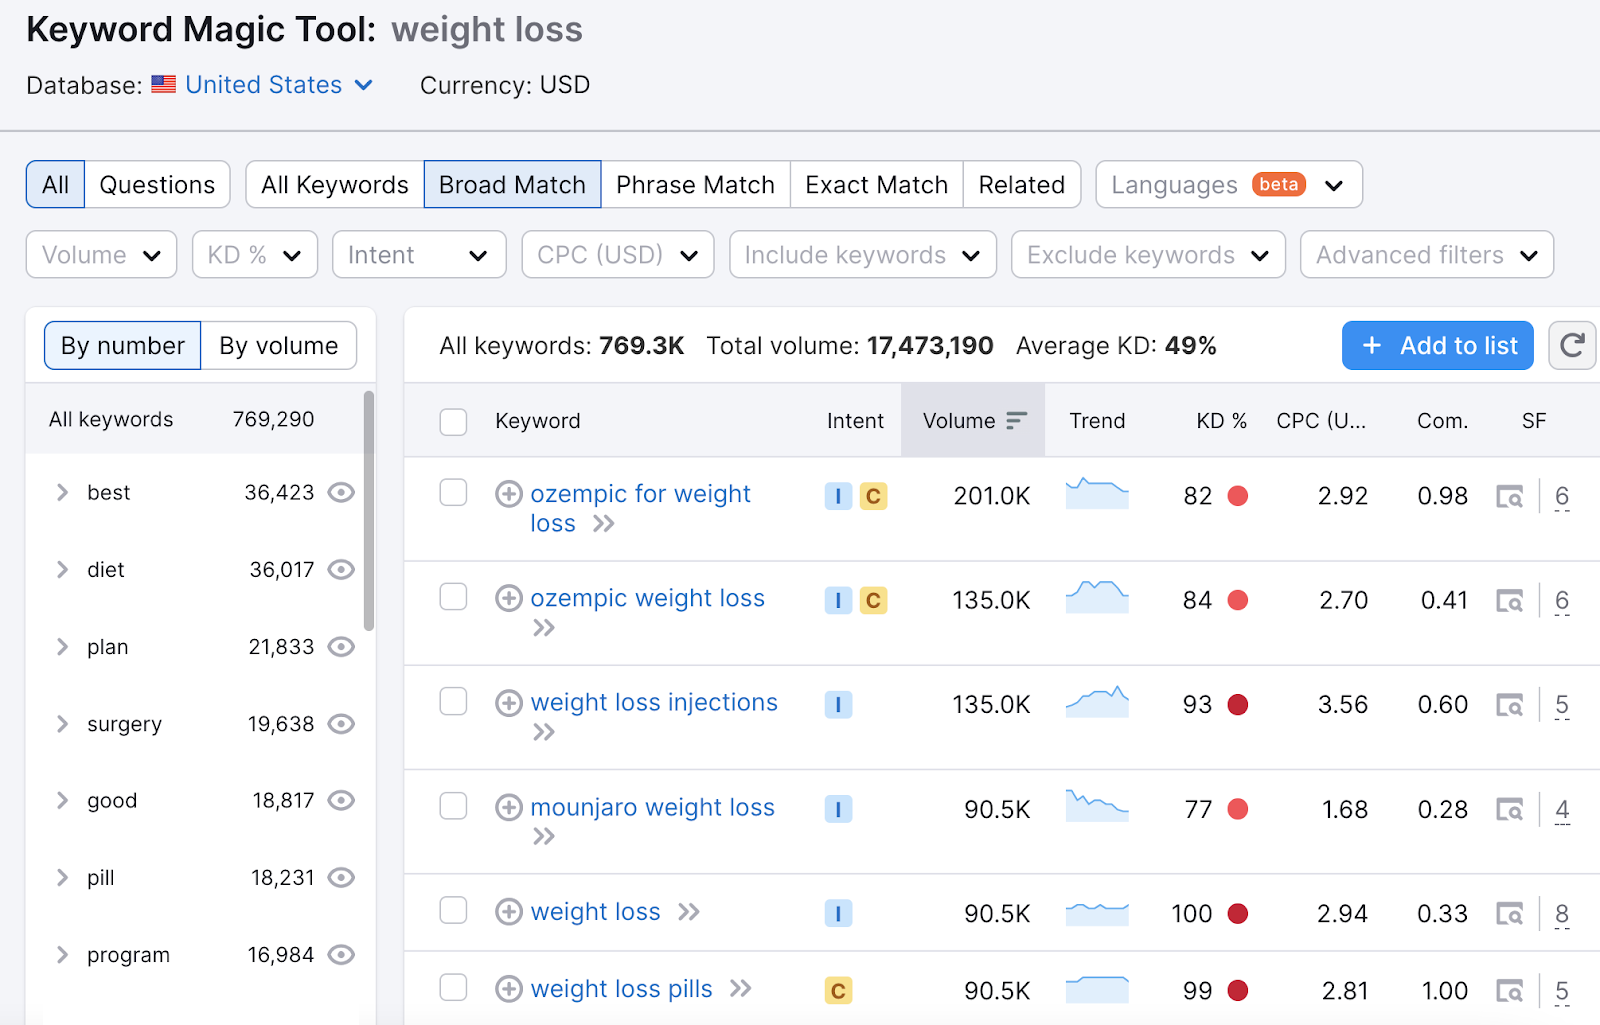 Keyword Magic Tool results for "weight loss" keyword search